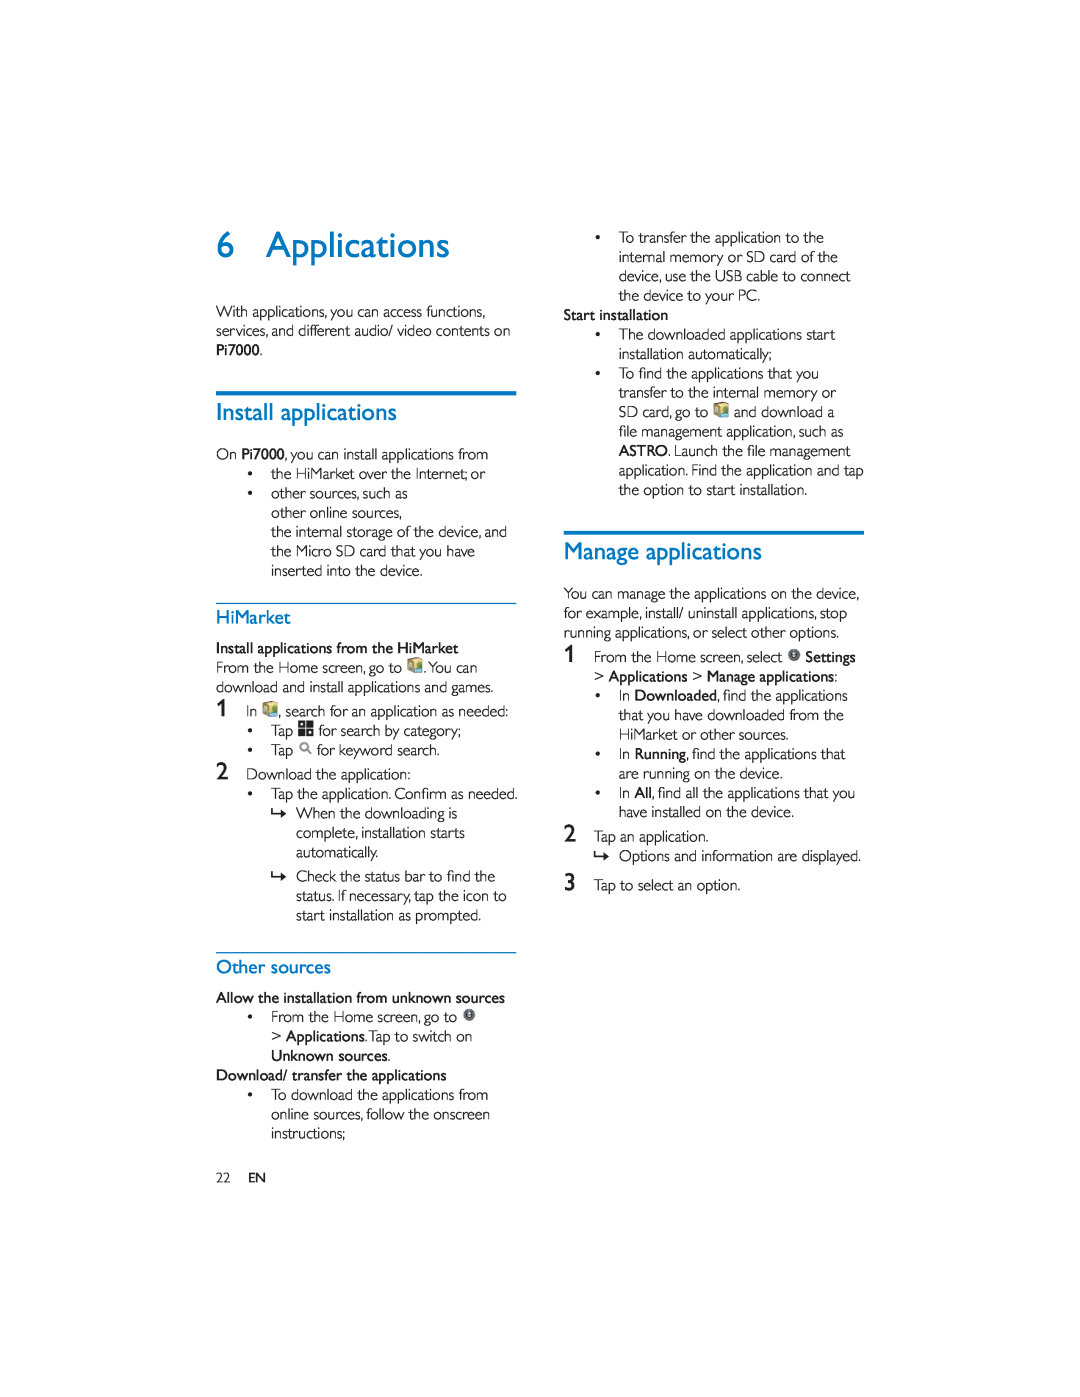 Philips PI7000/93 user manual Applications, Install applications, Manage applications, HiMarket, Other sources 